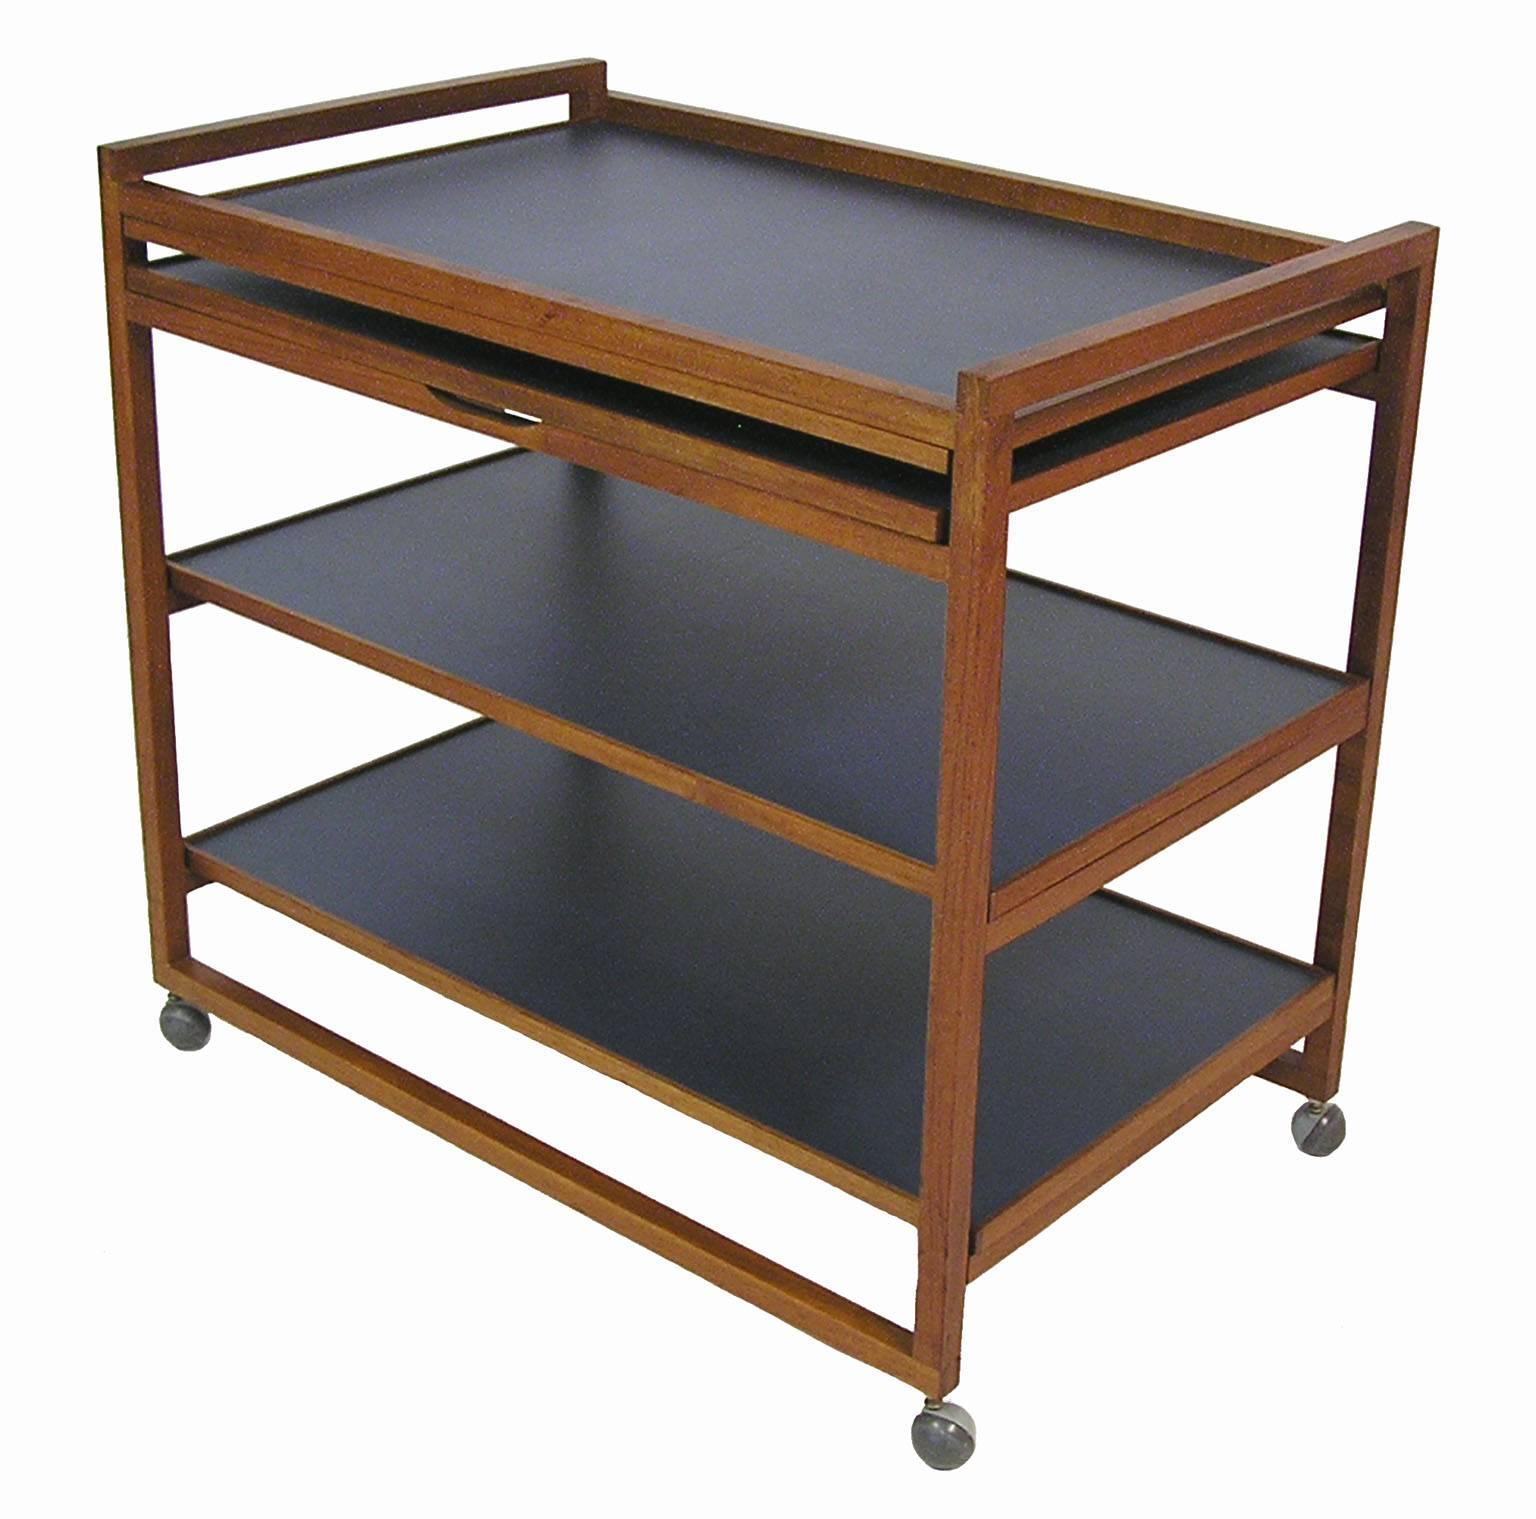 A unique three-tier teak and Laminate serving/bar cart from the 1960s Danish Modern era. Clean Scandinavian Modern era lines with a finger jointed solid teak frame, original castors and multiple laminated surface areas that are each designed to